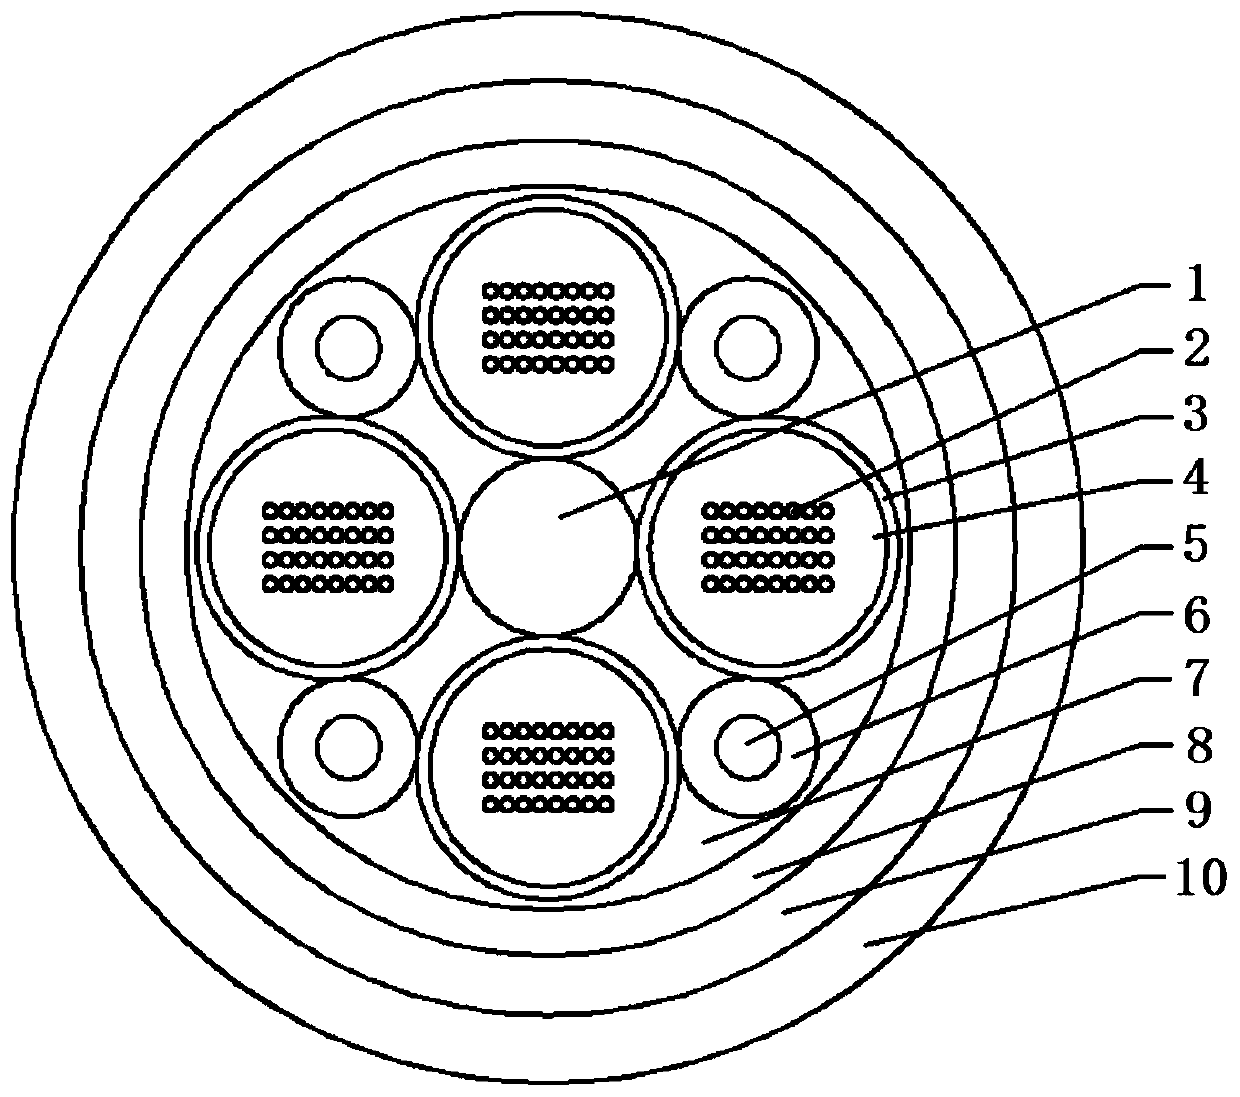 Large-core-number optical cable for pipelines